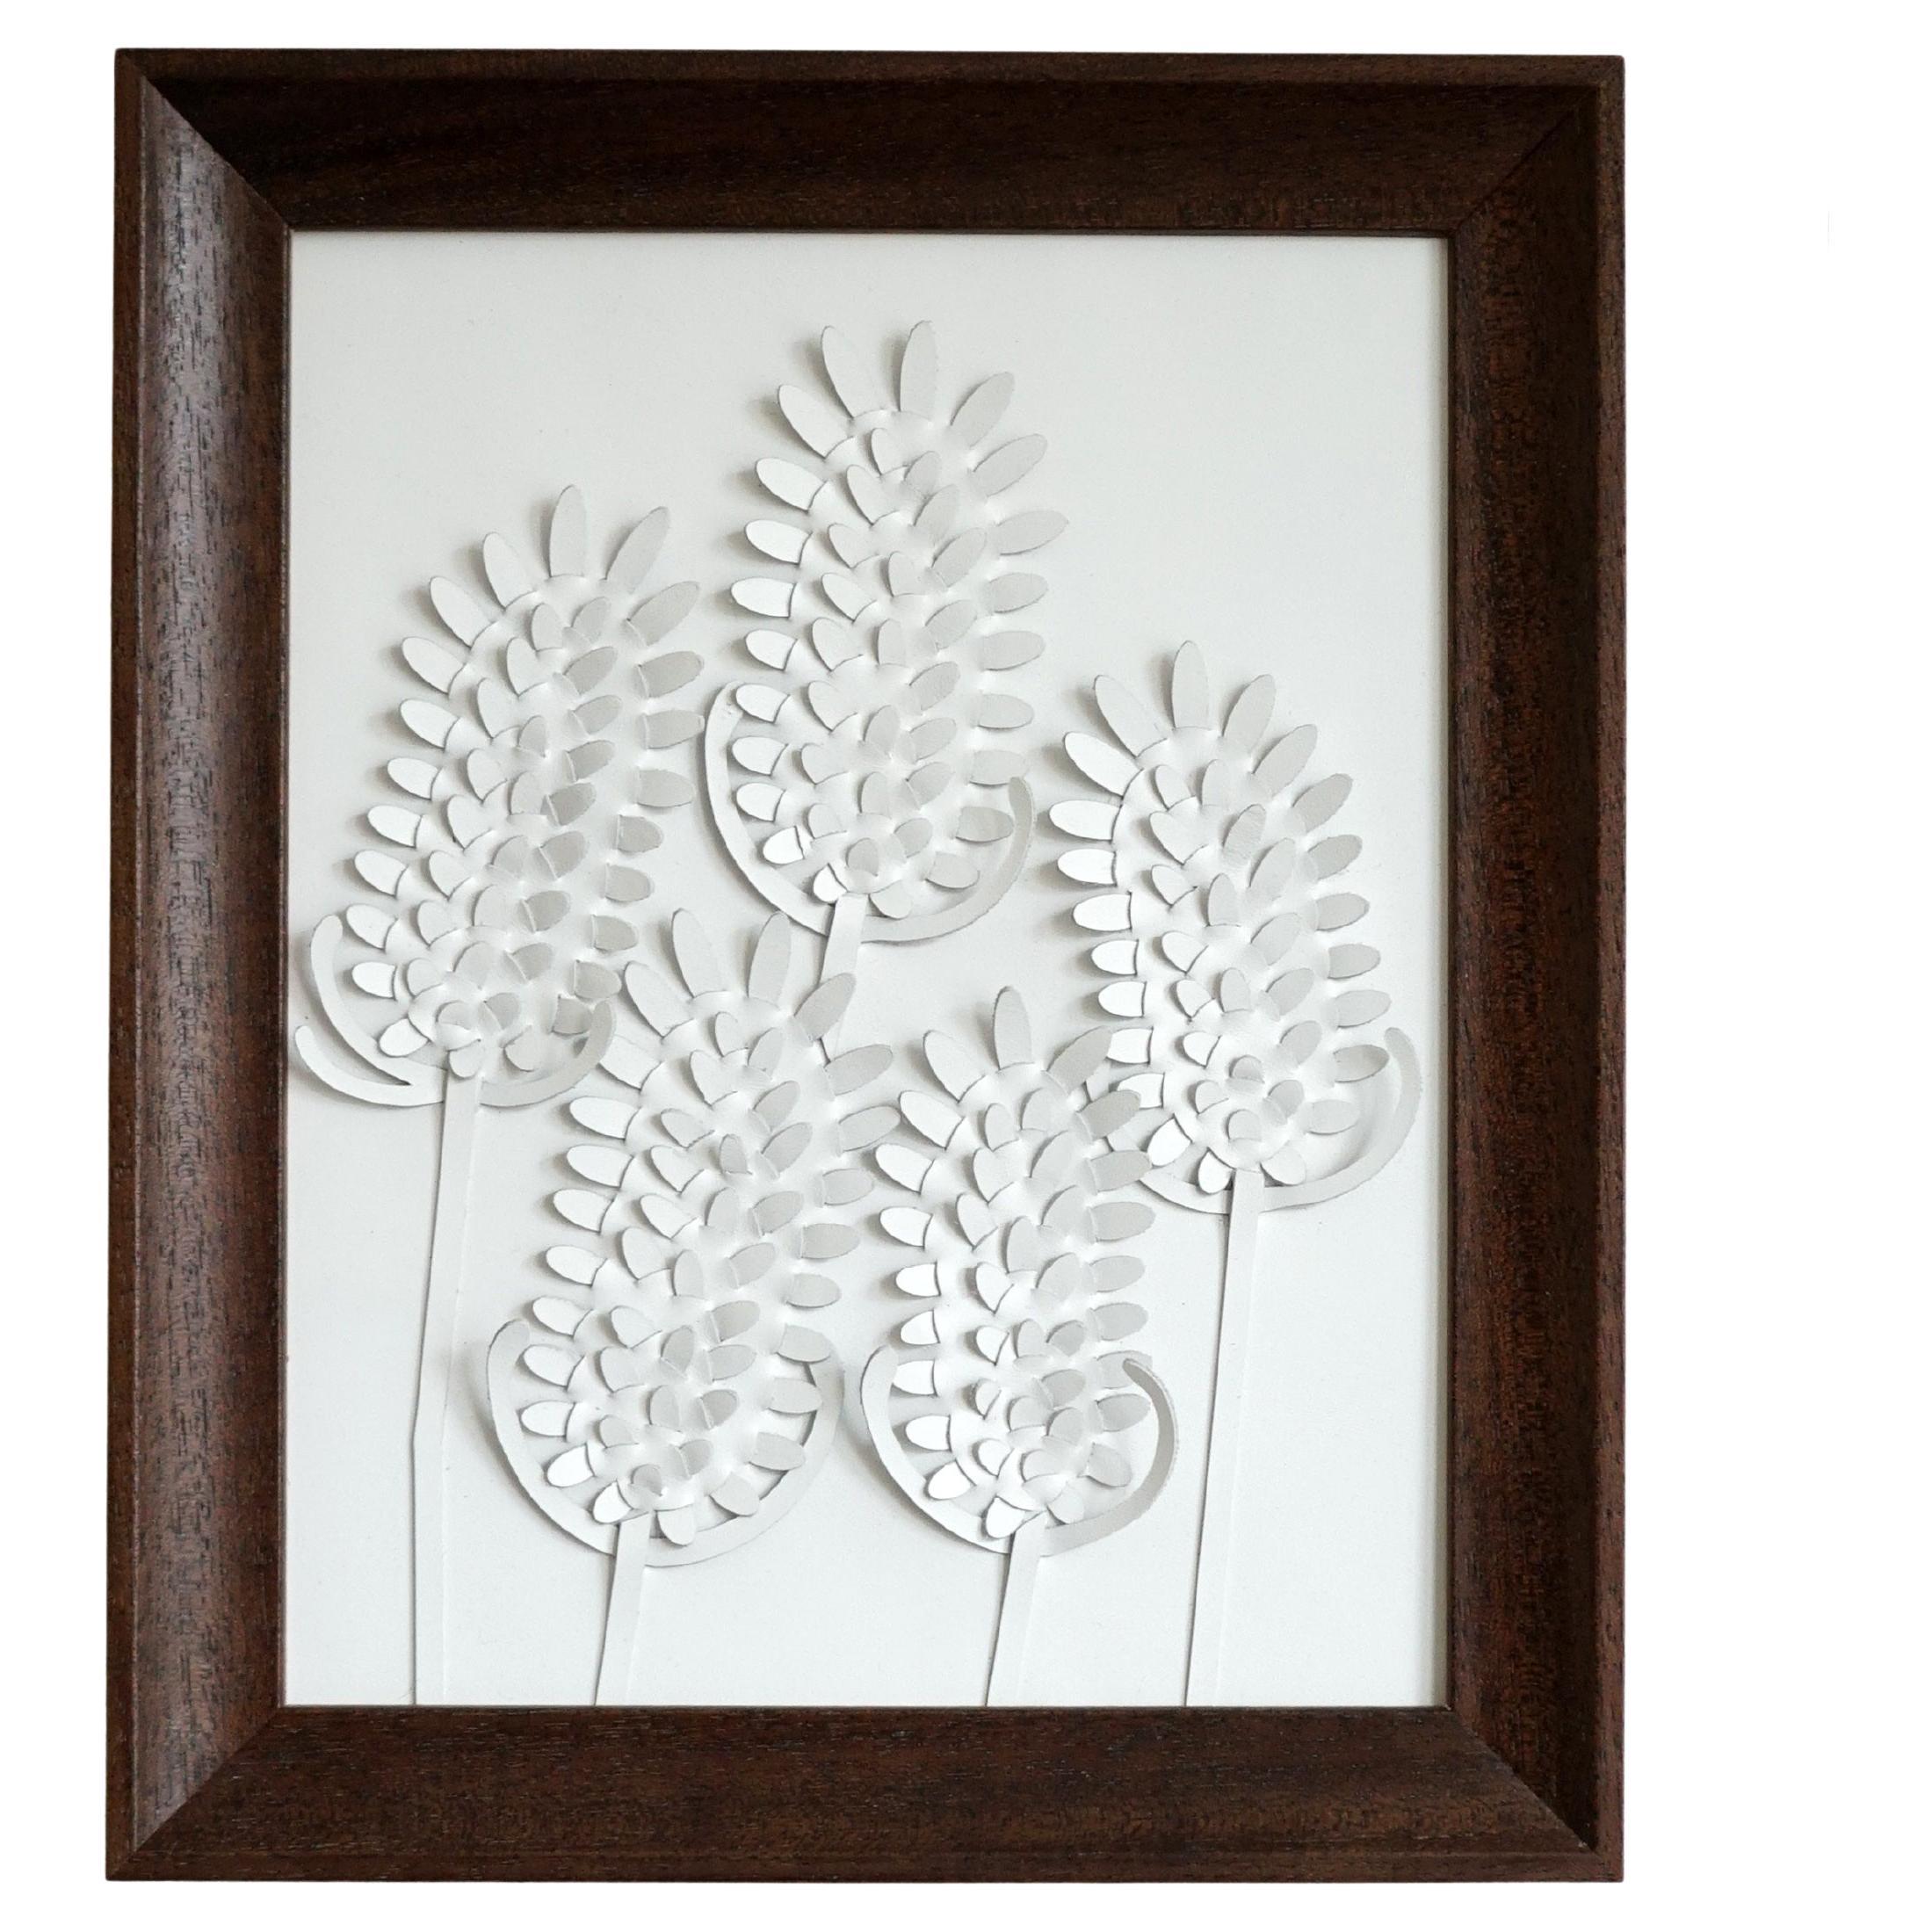 Teasel a Piece of 3D Sculptural White Leather Wall Art For Sale